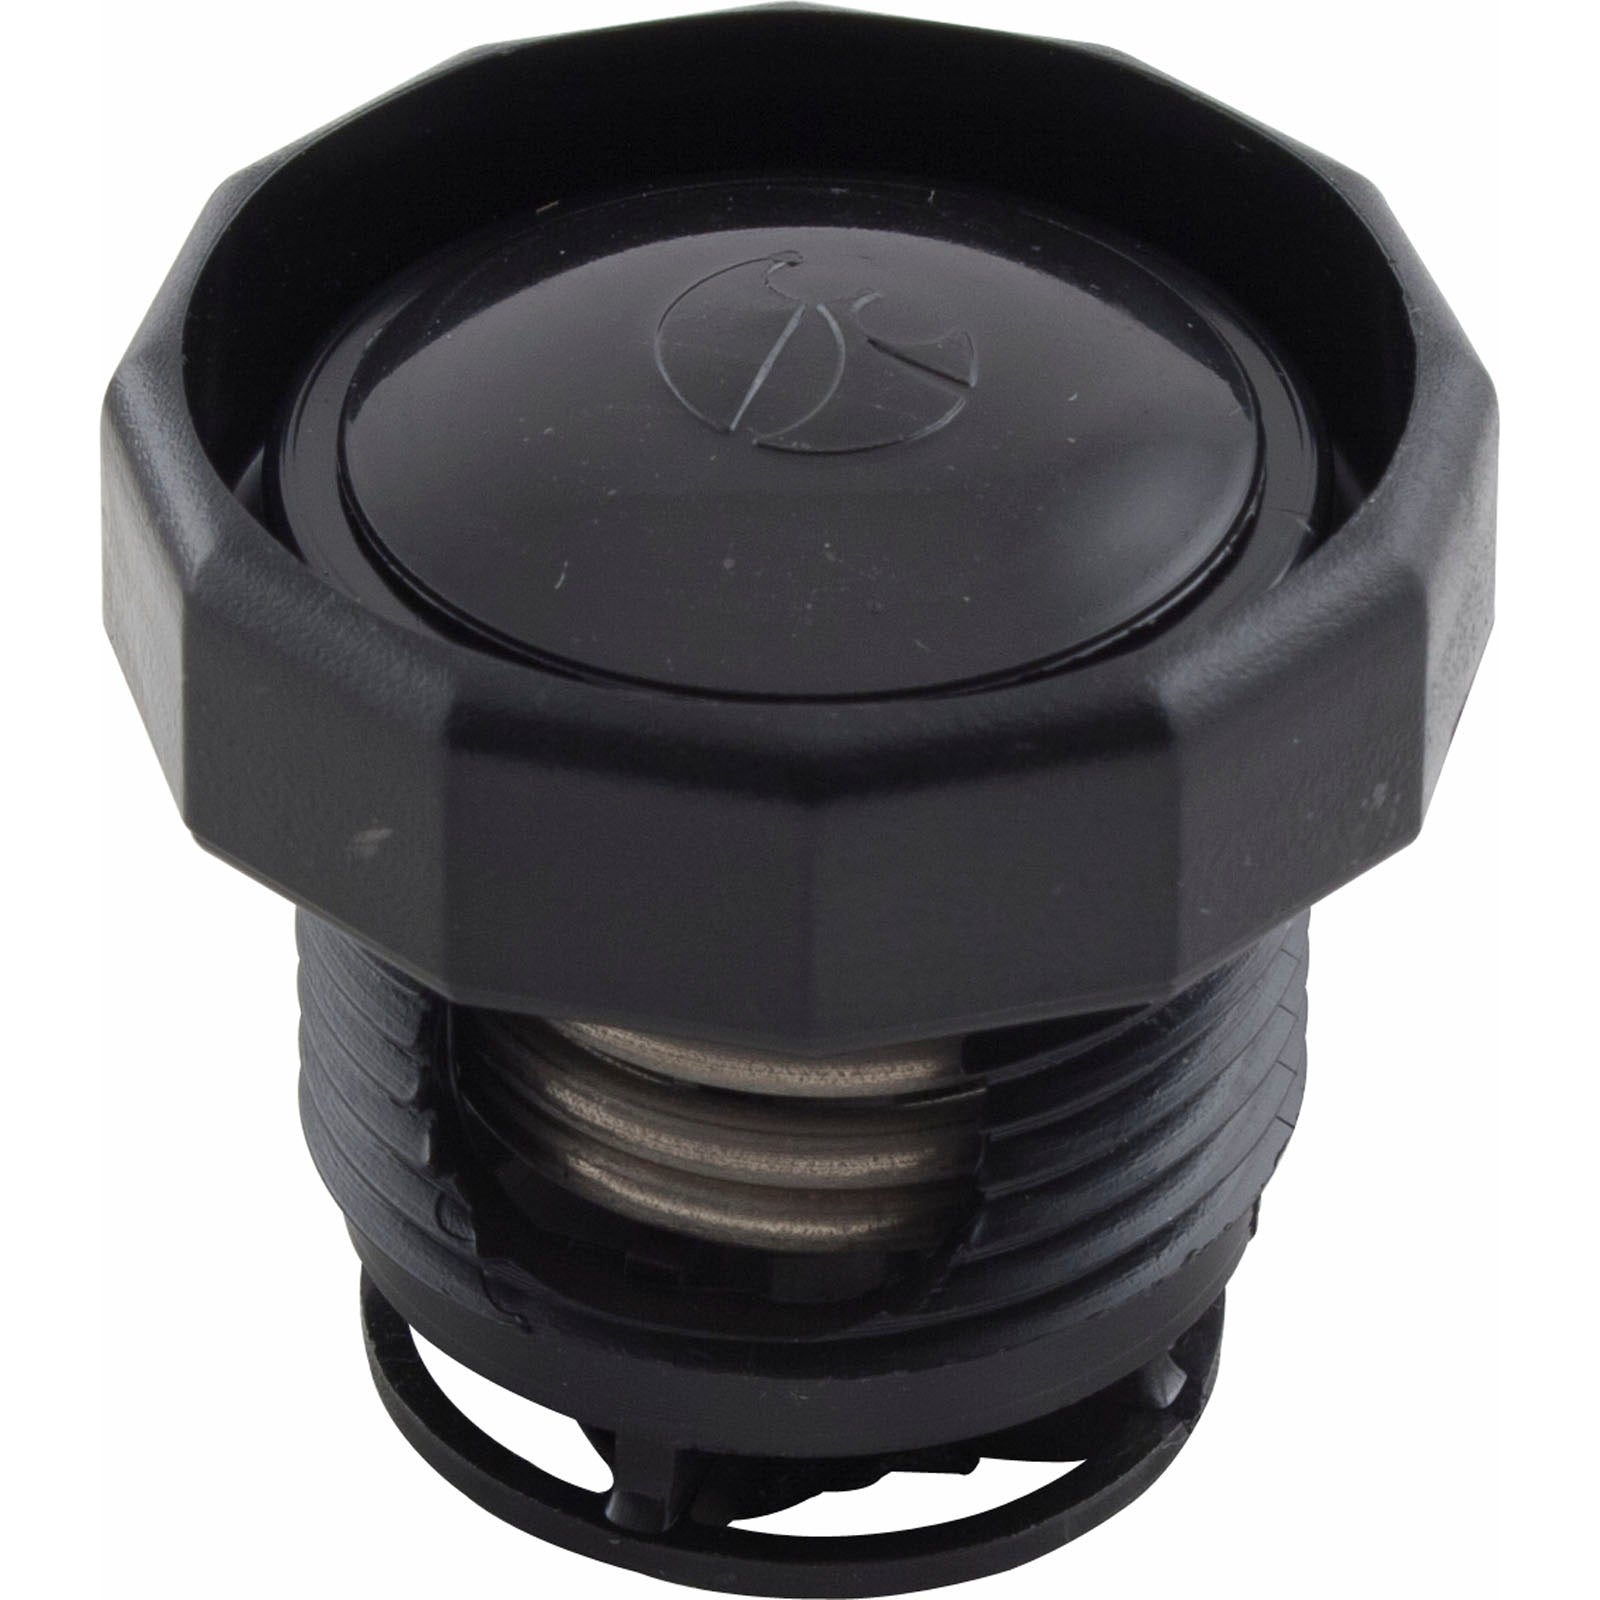 Zodiac/Polaris 9-100-9006 Black Pressure Relief Assembly for Vac-Sweep 280/360 Pool Cleaners